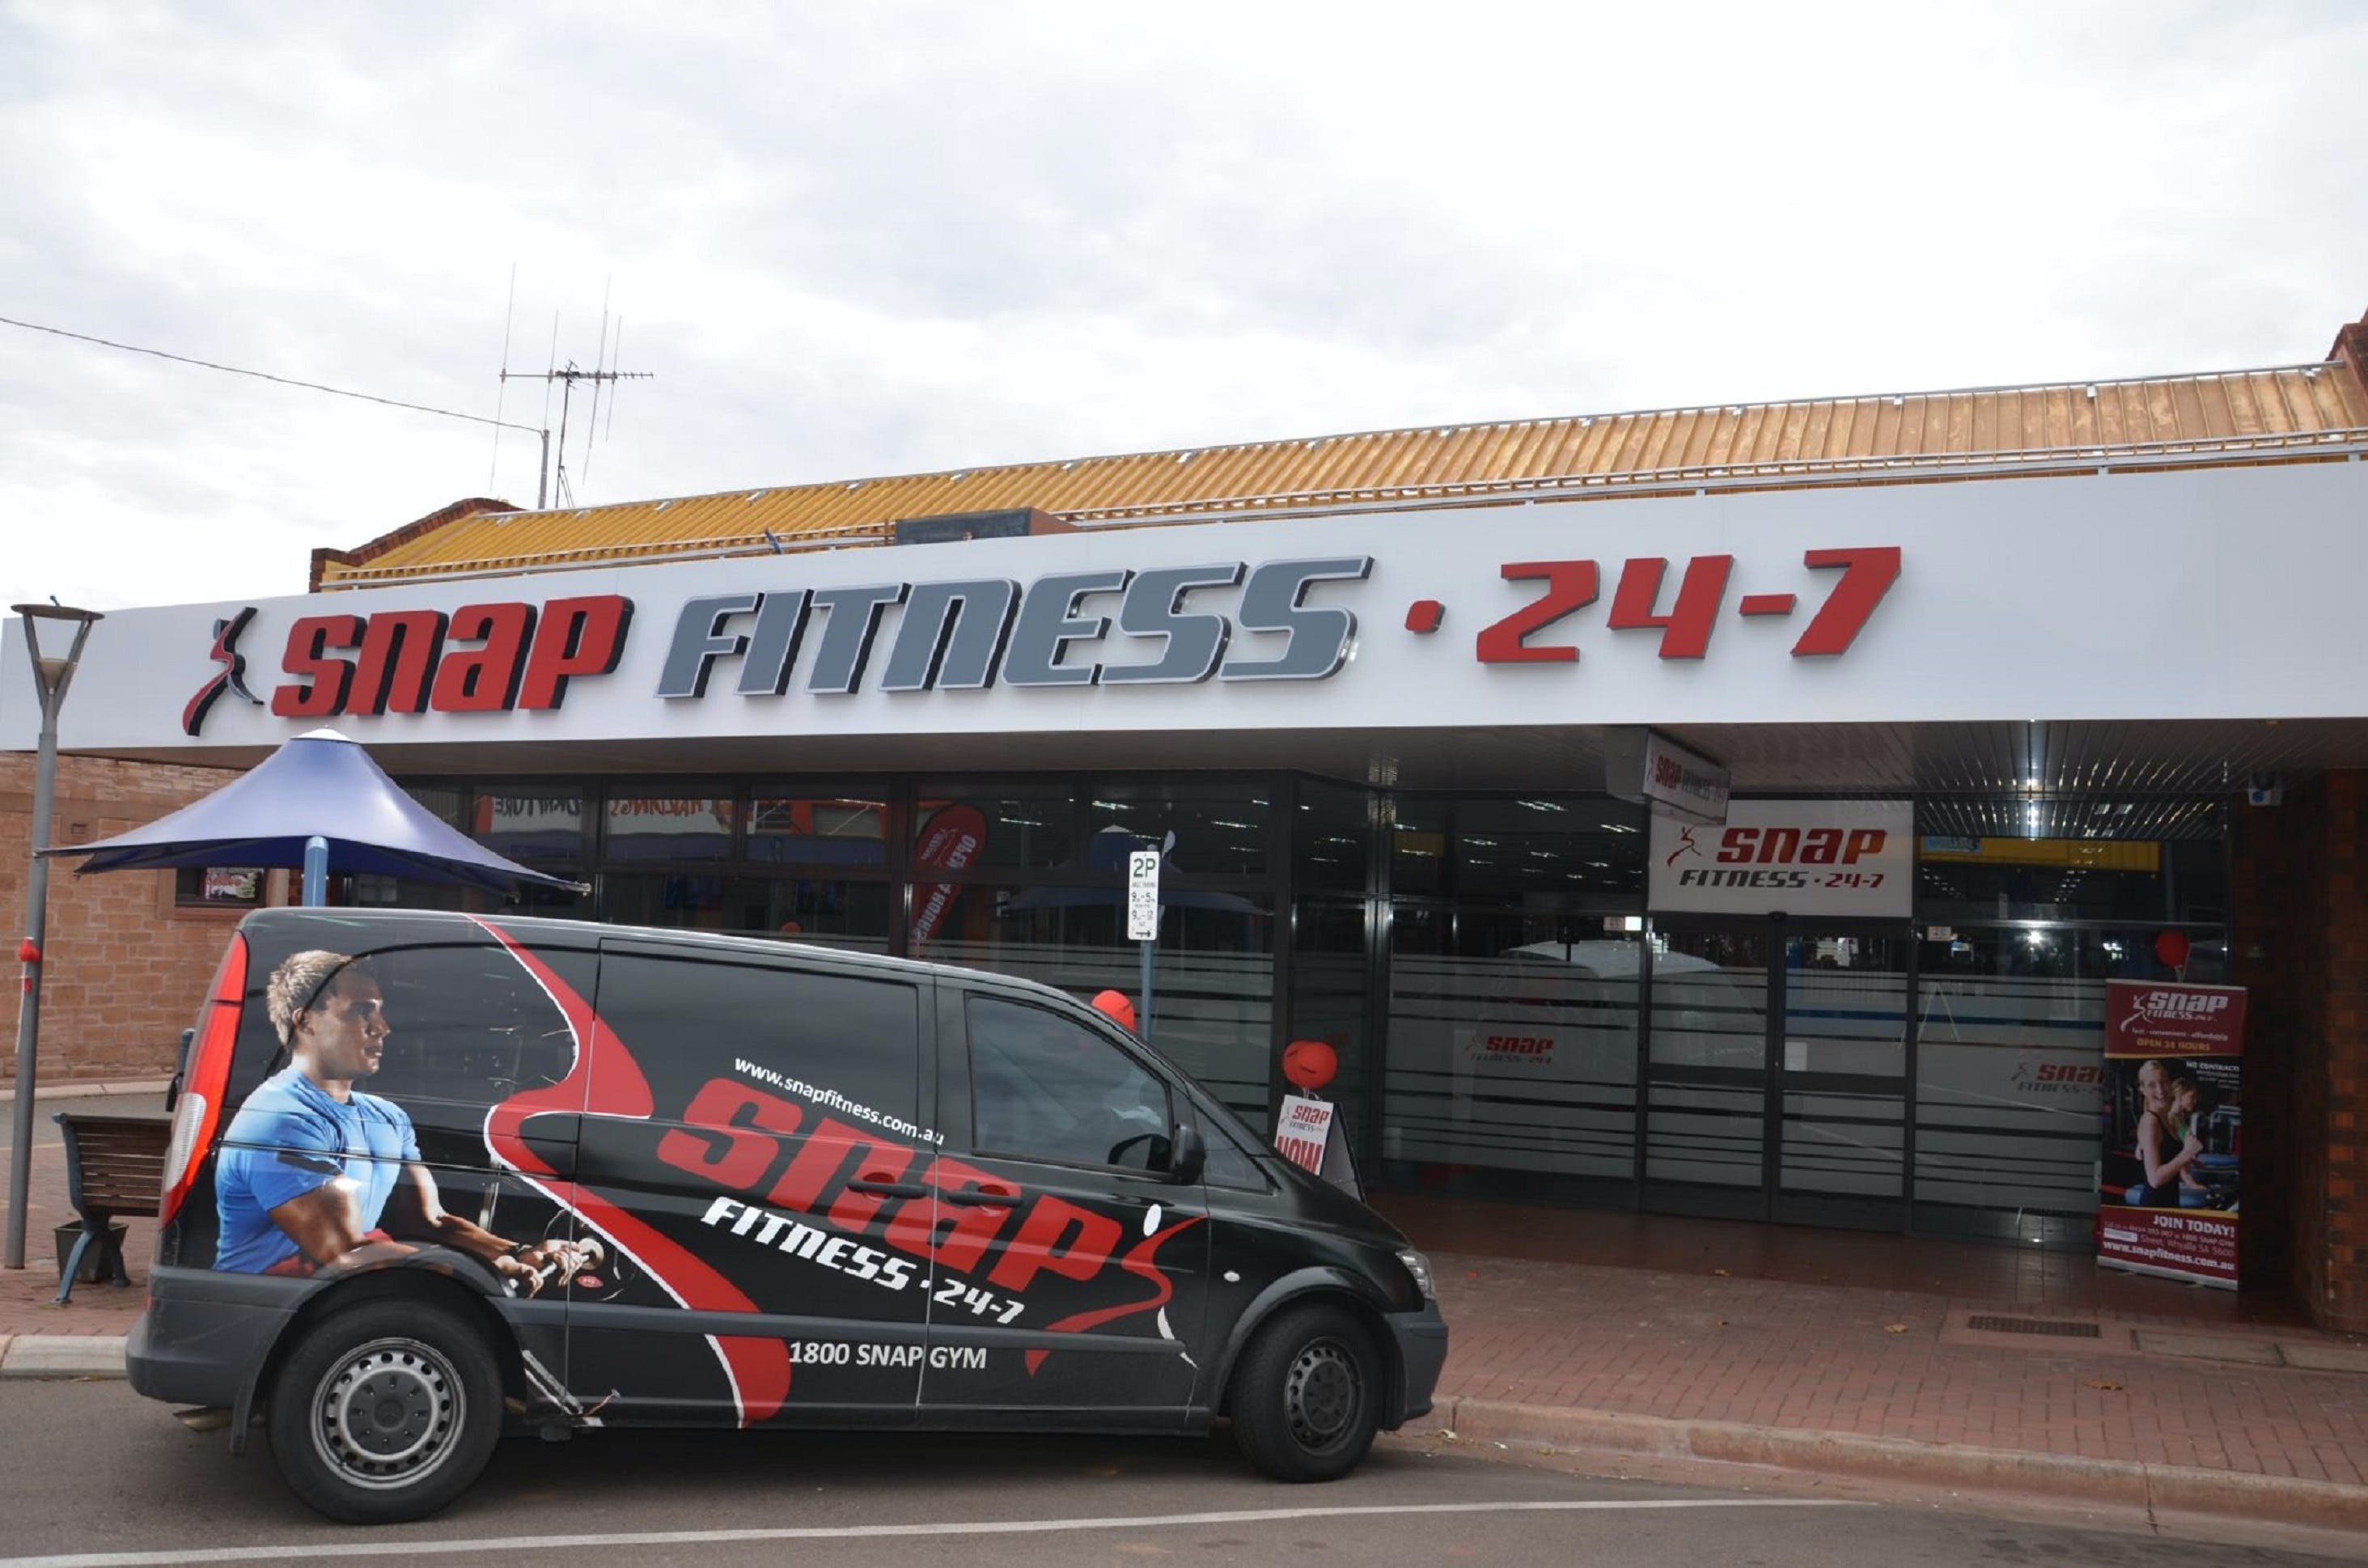 Snap Fitness Whyalla 24/7 gym - Accommodation VIC